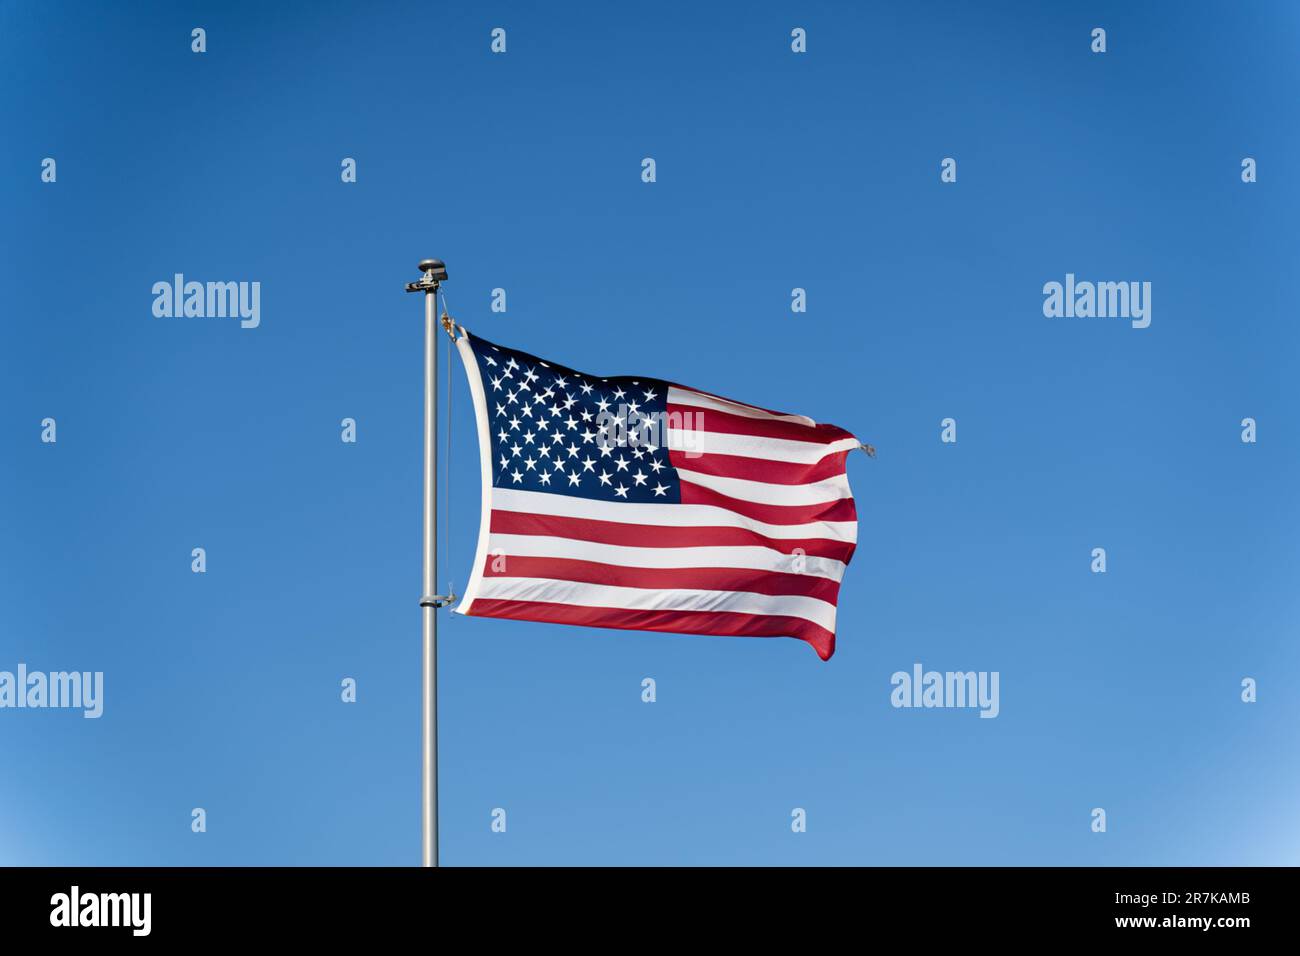 The flag of the United States of America flutters in the wind against a clear blue sky. Waving USA flag Stock Photo